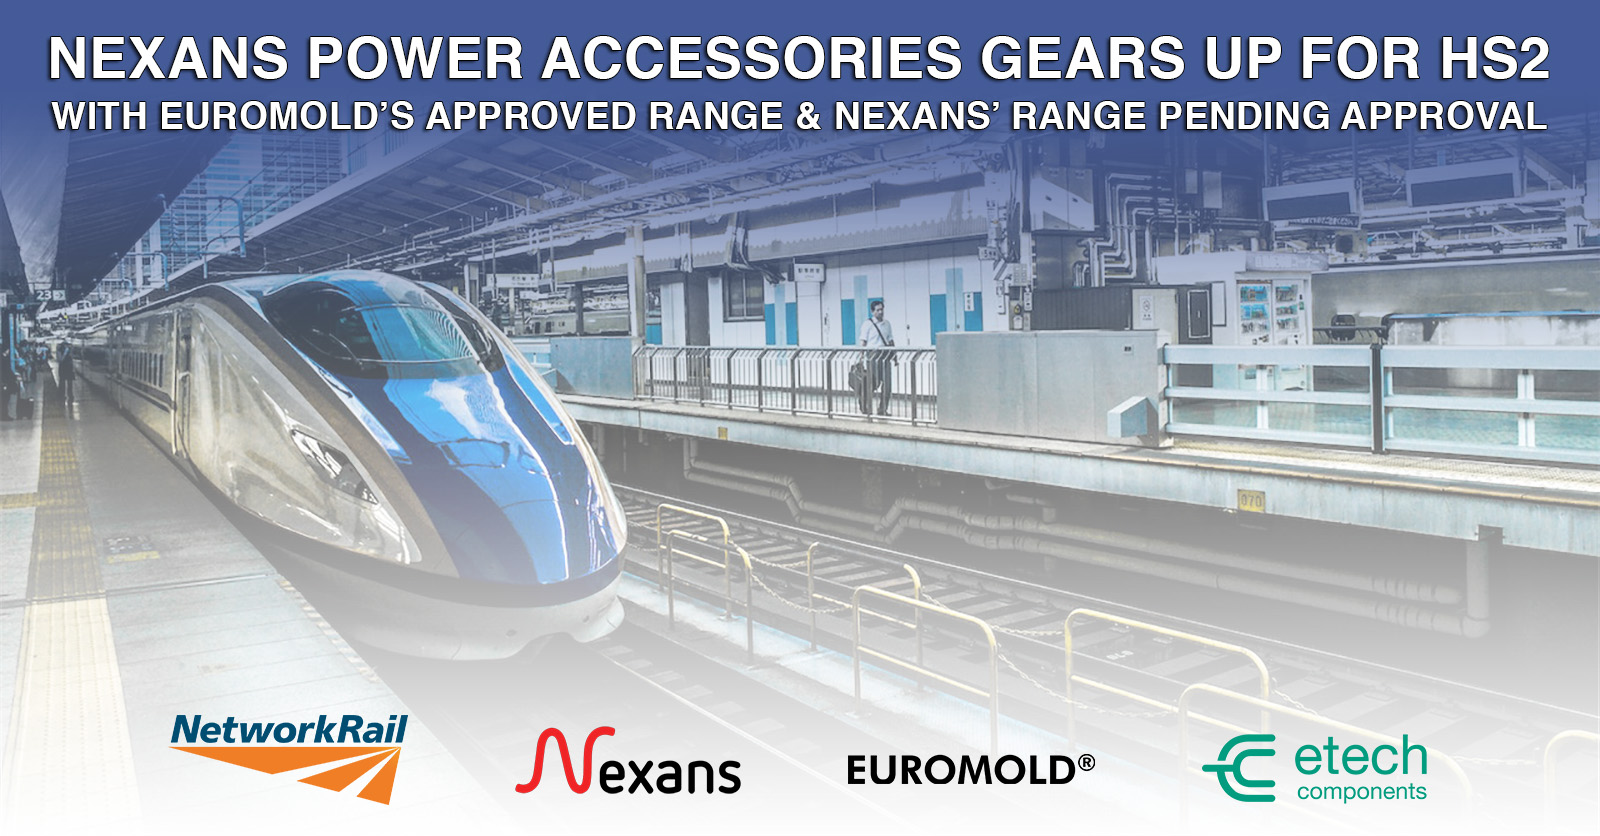 Nexans Power Accessories Gears up for HS2 - Network Rail PADS Approval